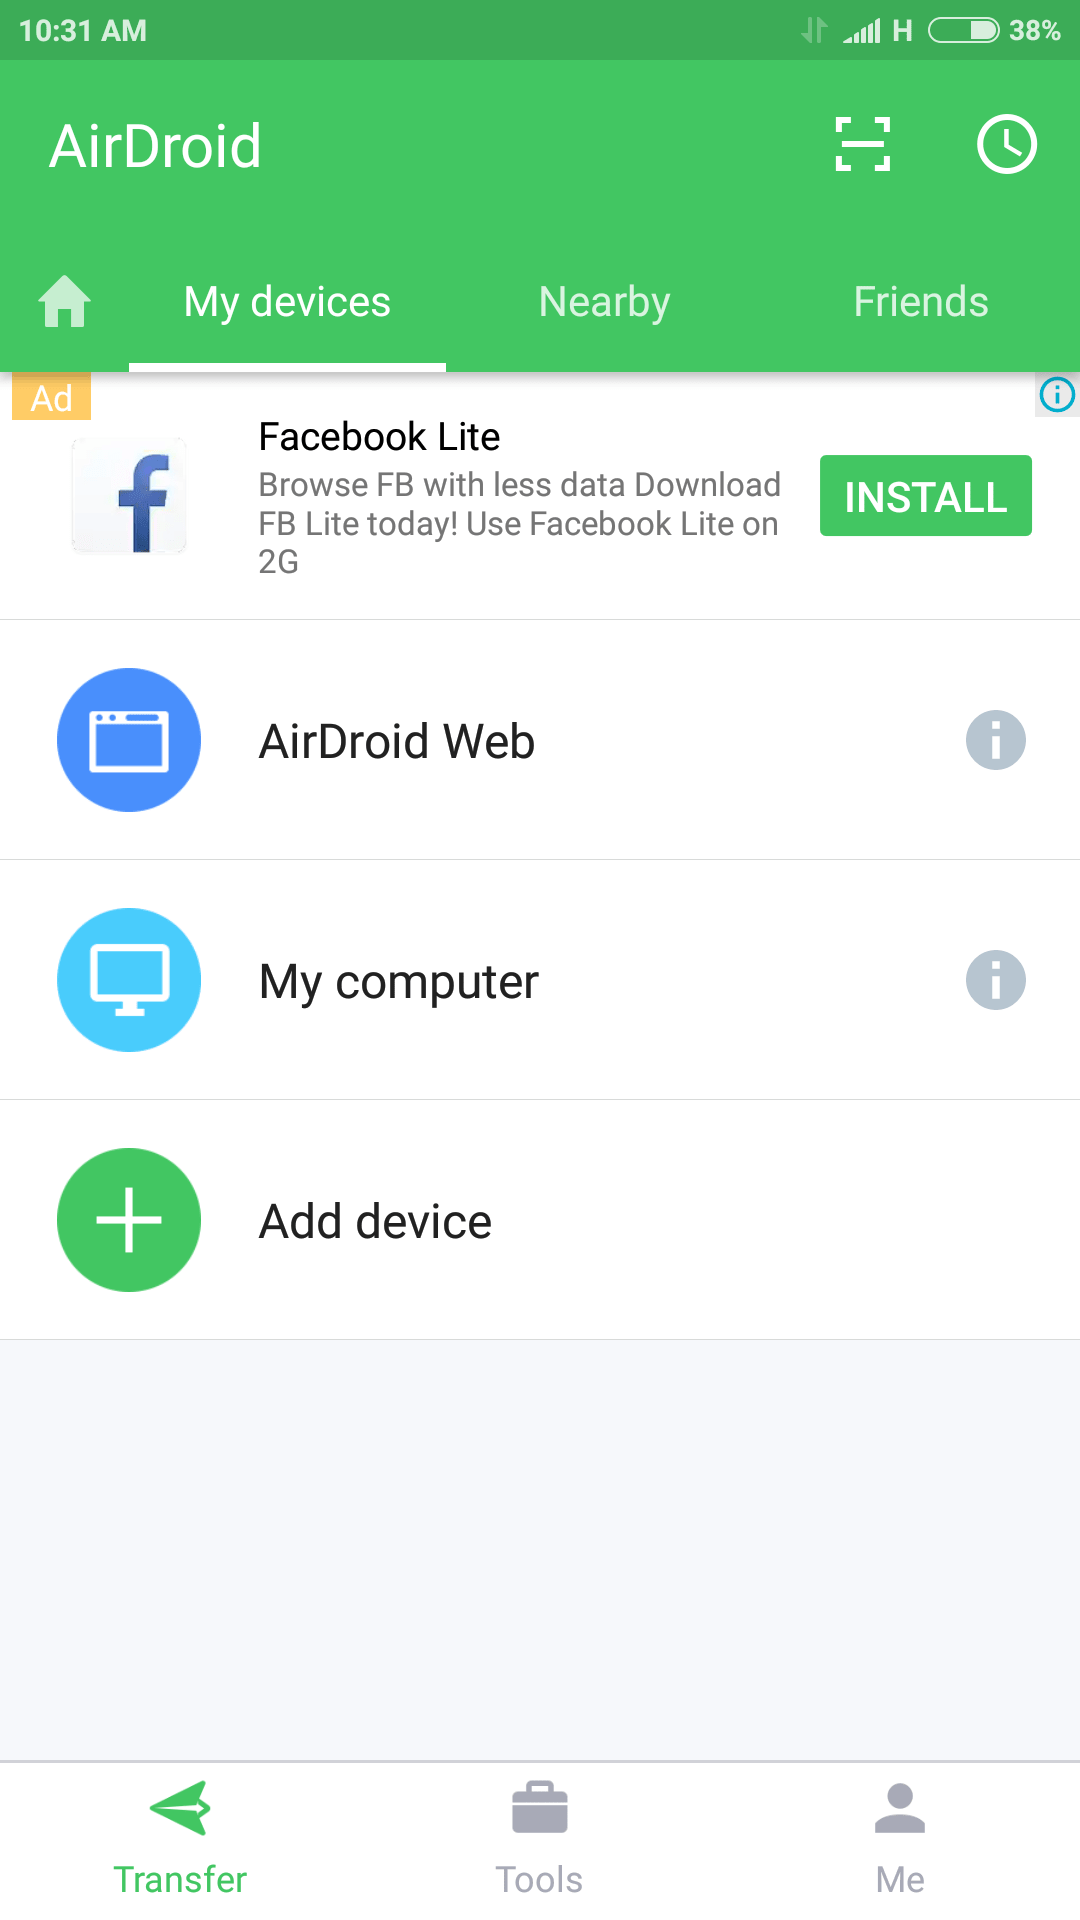 Click on transfer button in the app and select AirDroid Web option